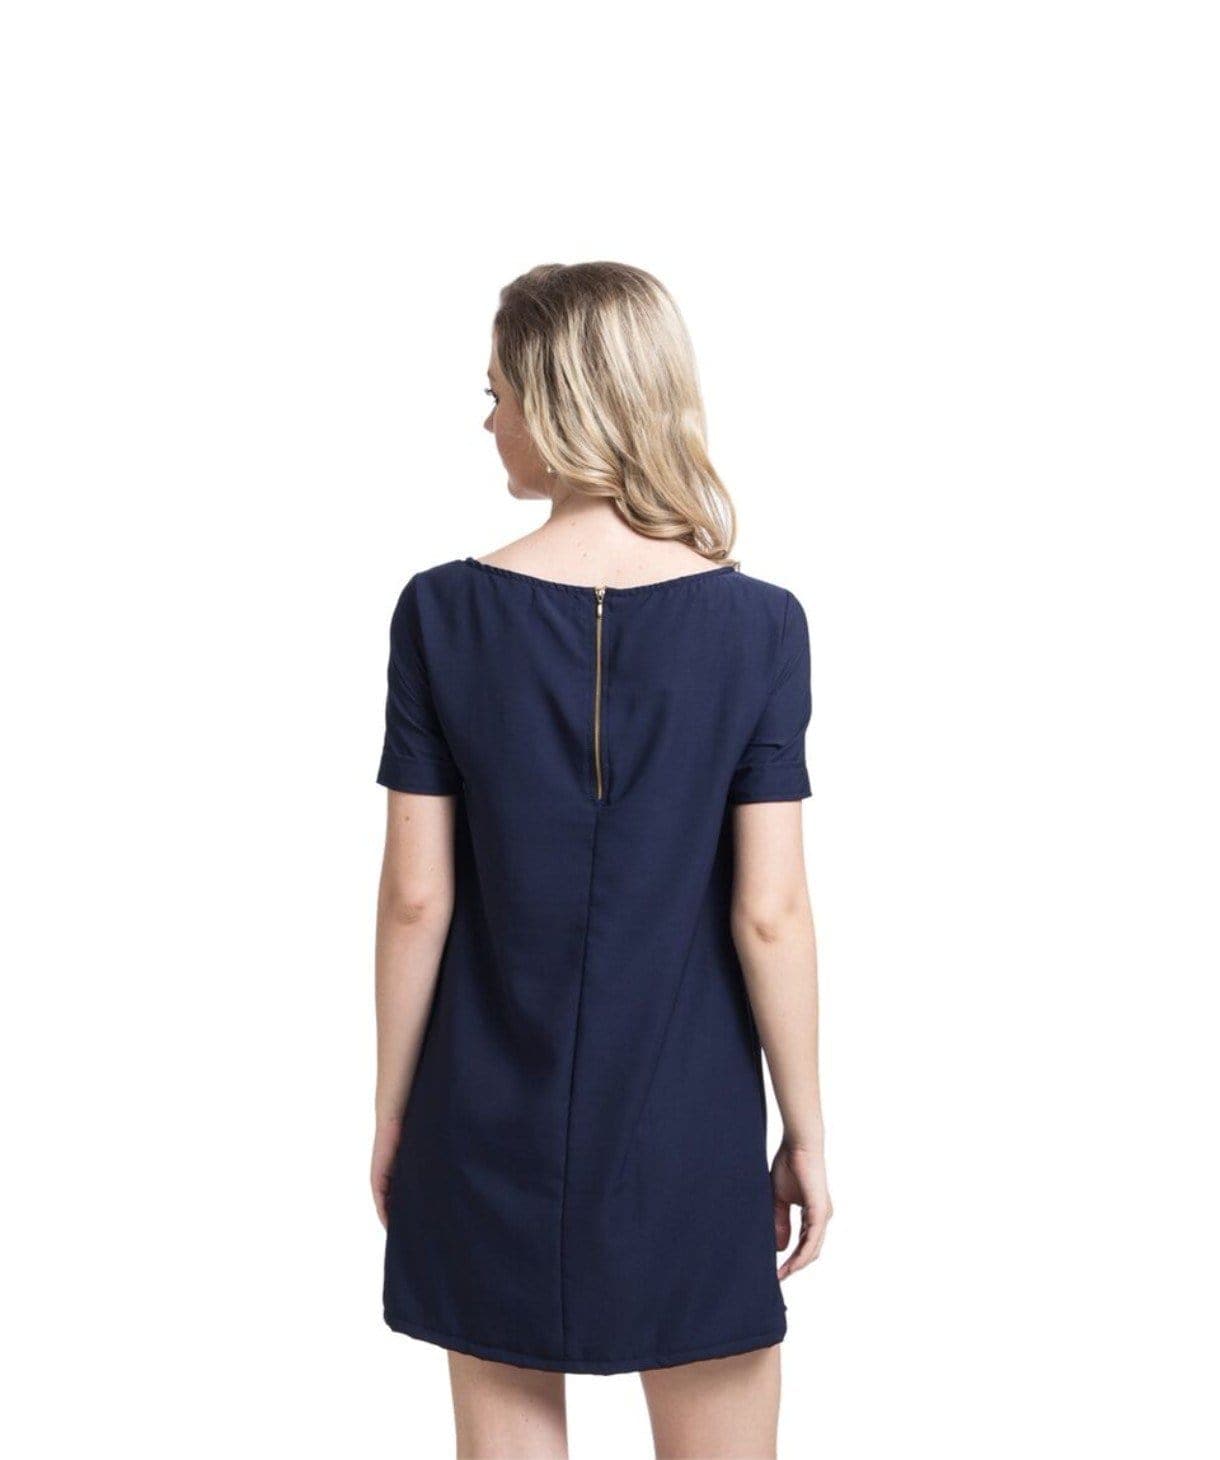 Solid Navy Blue Shift Dress - Uptownie